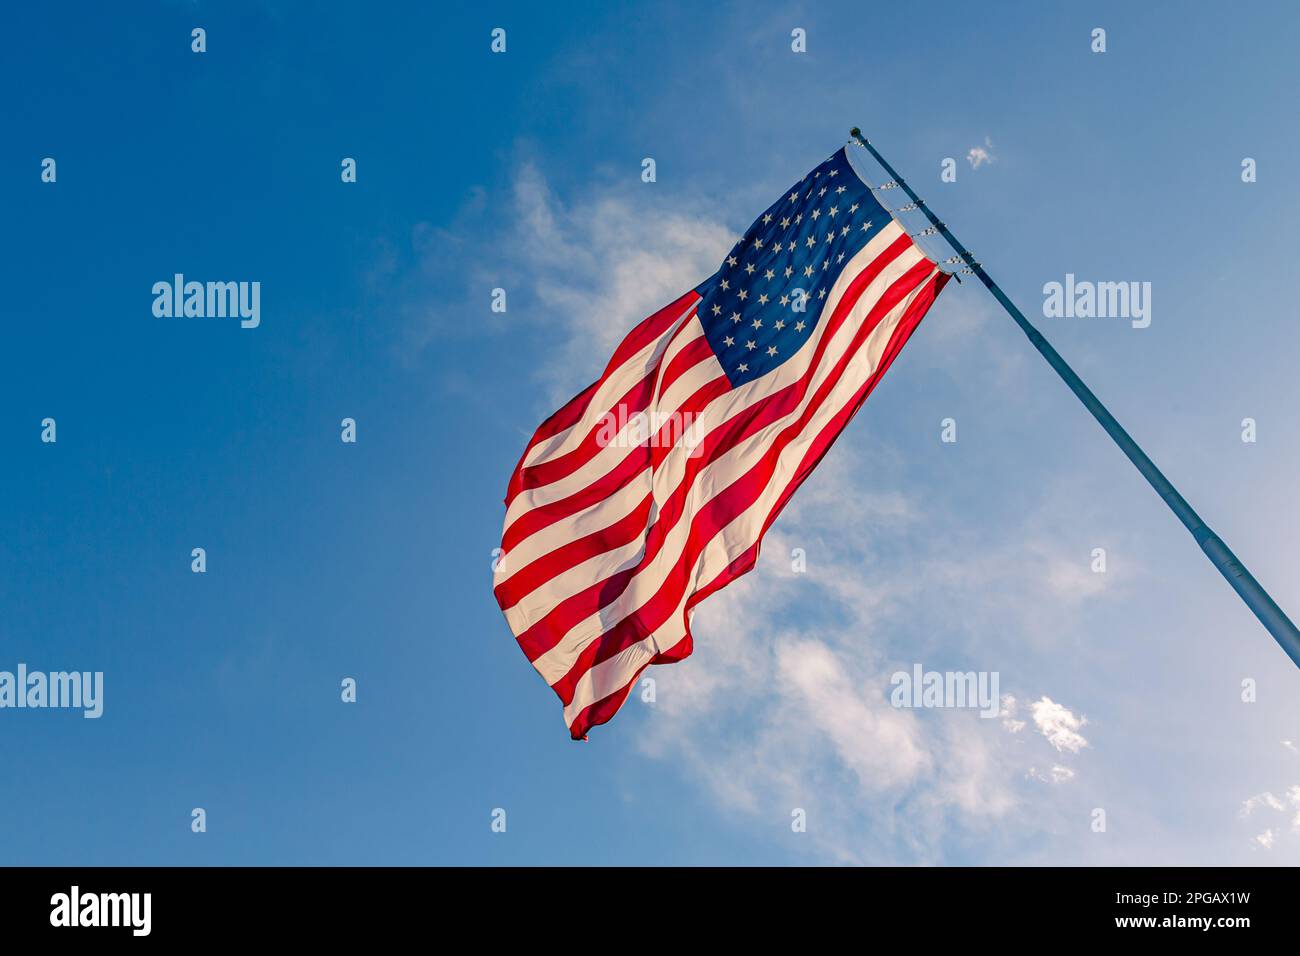 American USA flag on a flagpole waving in the wind. USA Flag Waving United States of America Flag Flying. American flag flying high on a pole against blue sky background on a clear day Stock Photo